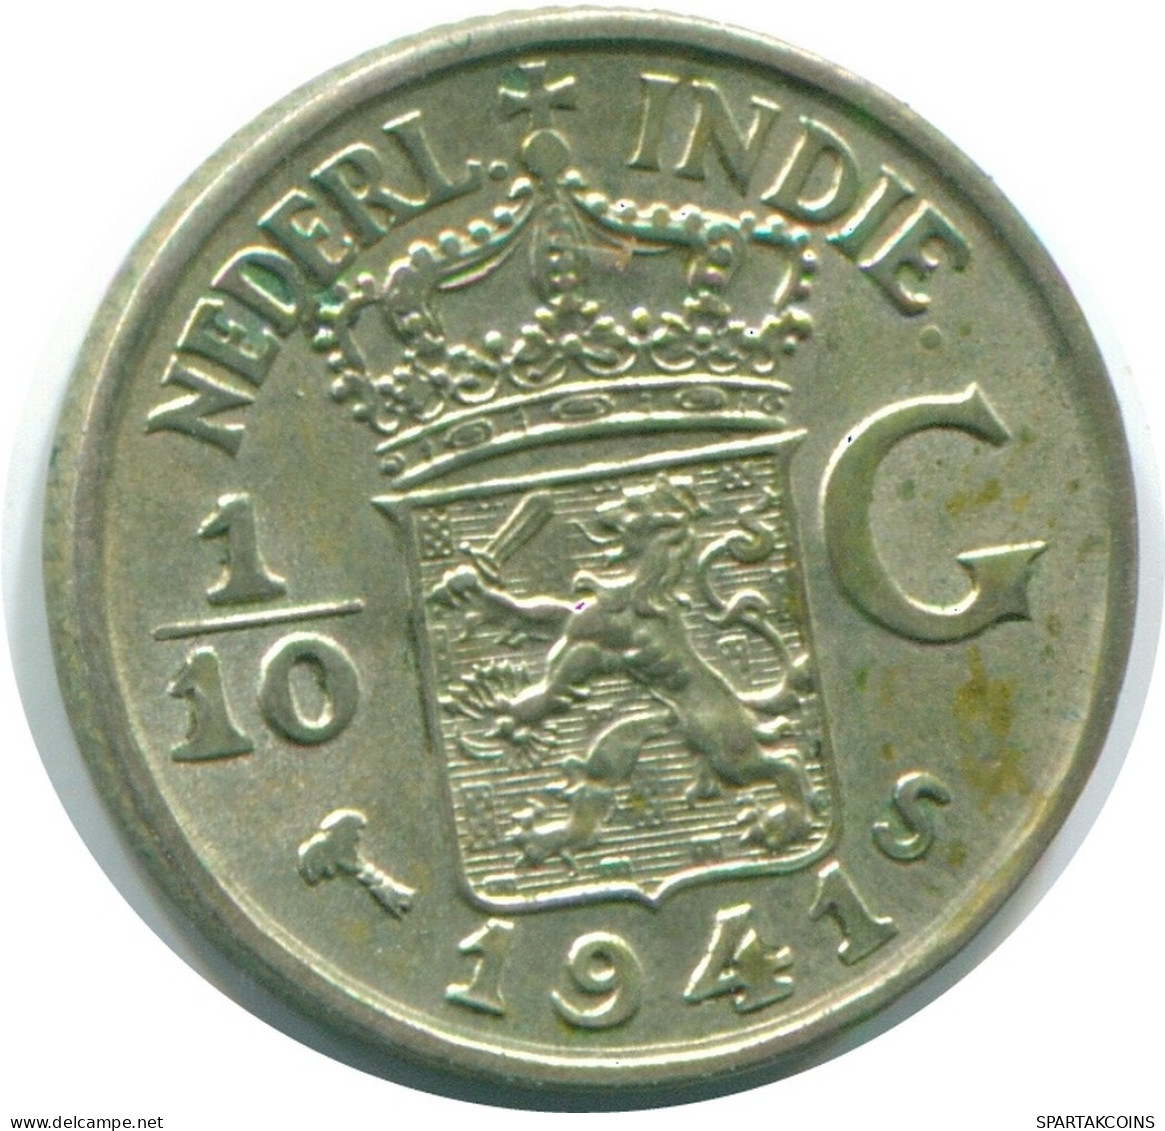 1/10 GULDEN 1941 S NETHERLANDS EAST INDIES SILVER Colonial Coin #NL13818.3.U.A - Indes Neerlandesas